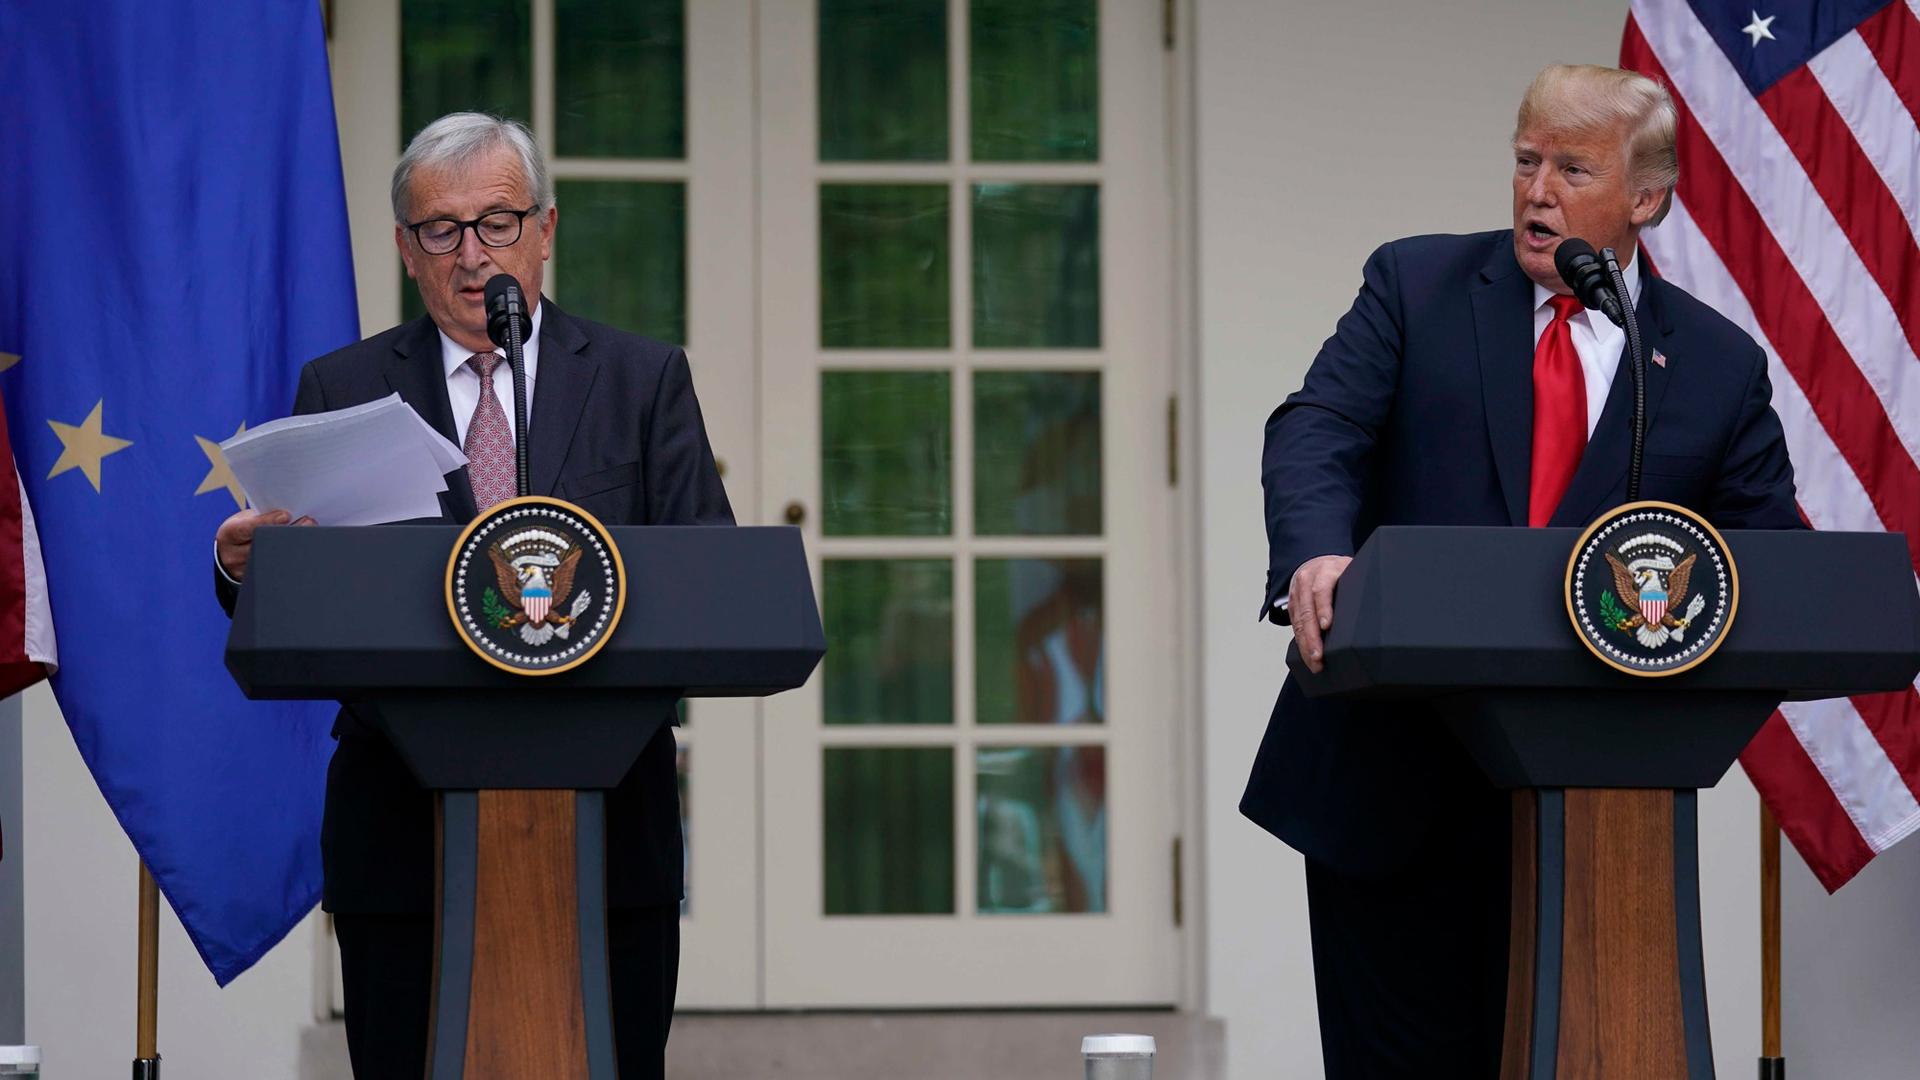 European Commission President Jean-Claude Juncker and US President Donald Trump stand at podiums in the Rose Garden of the White House, July 25, 2018.